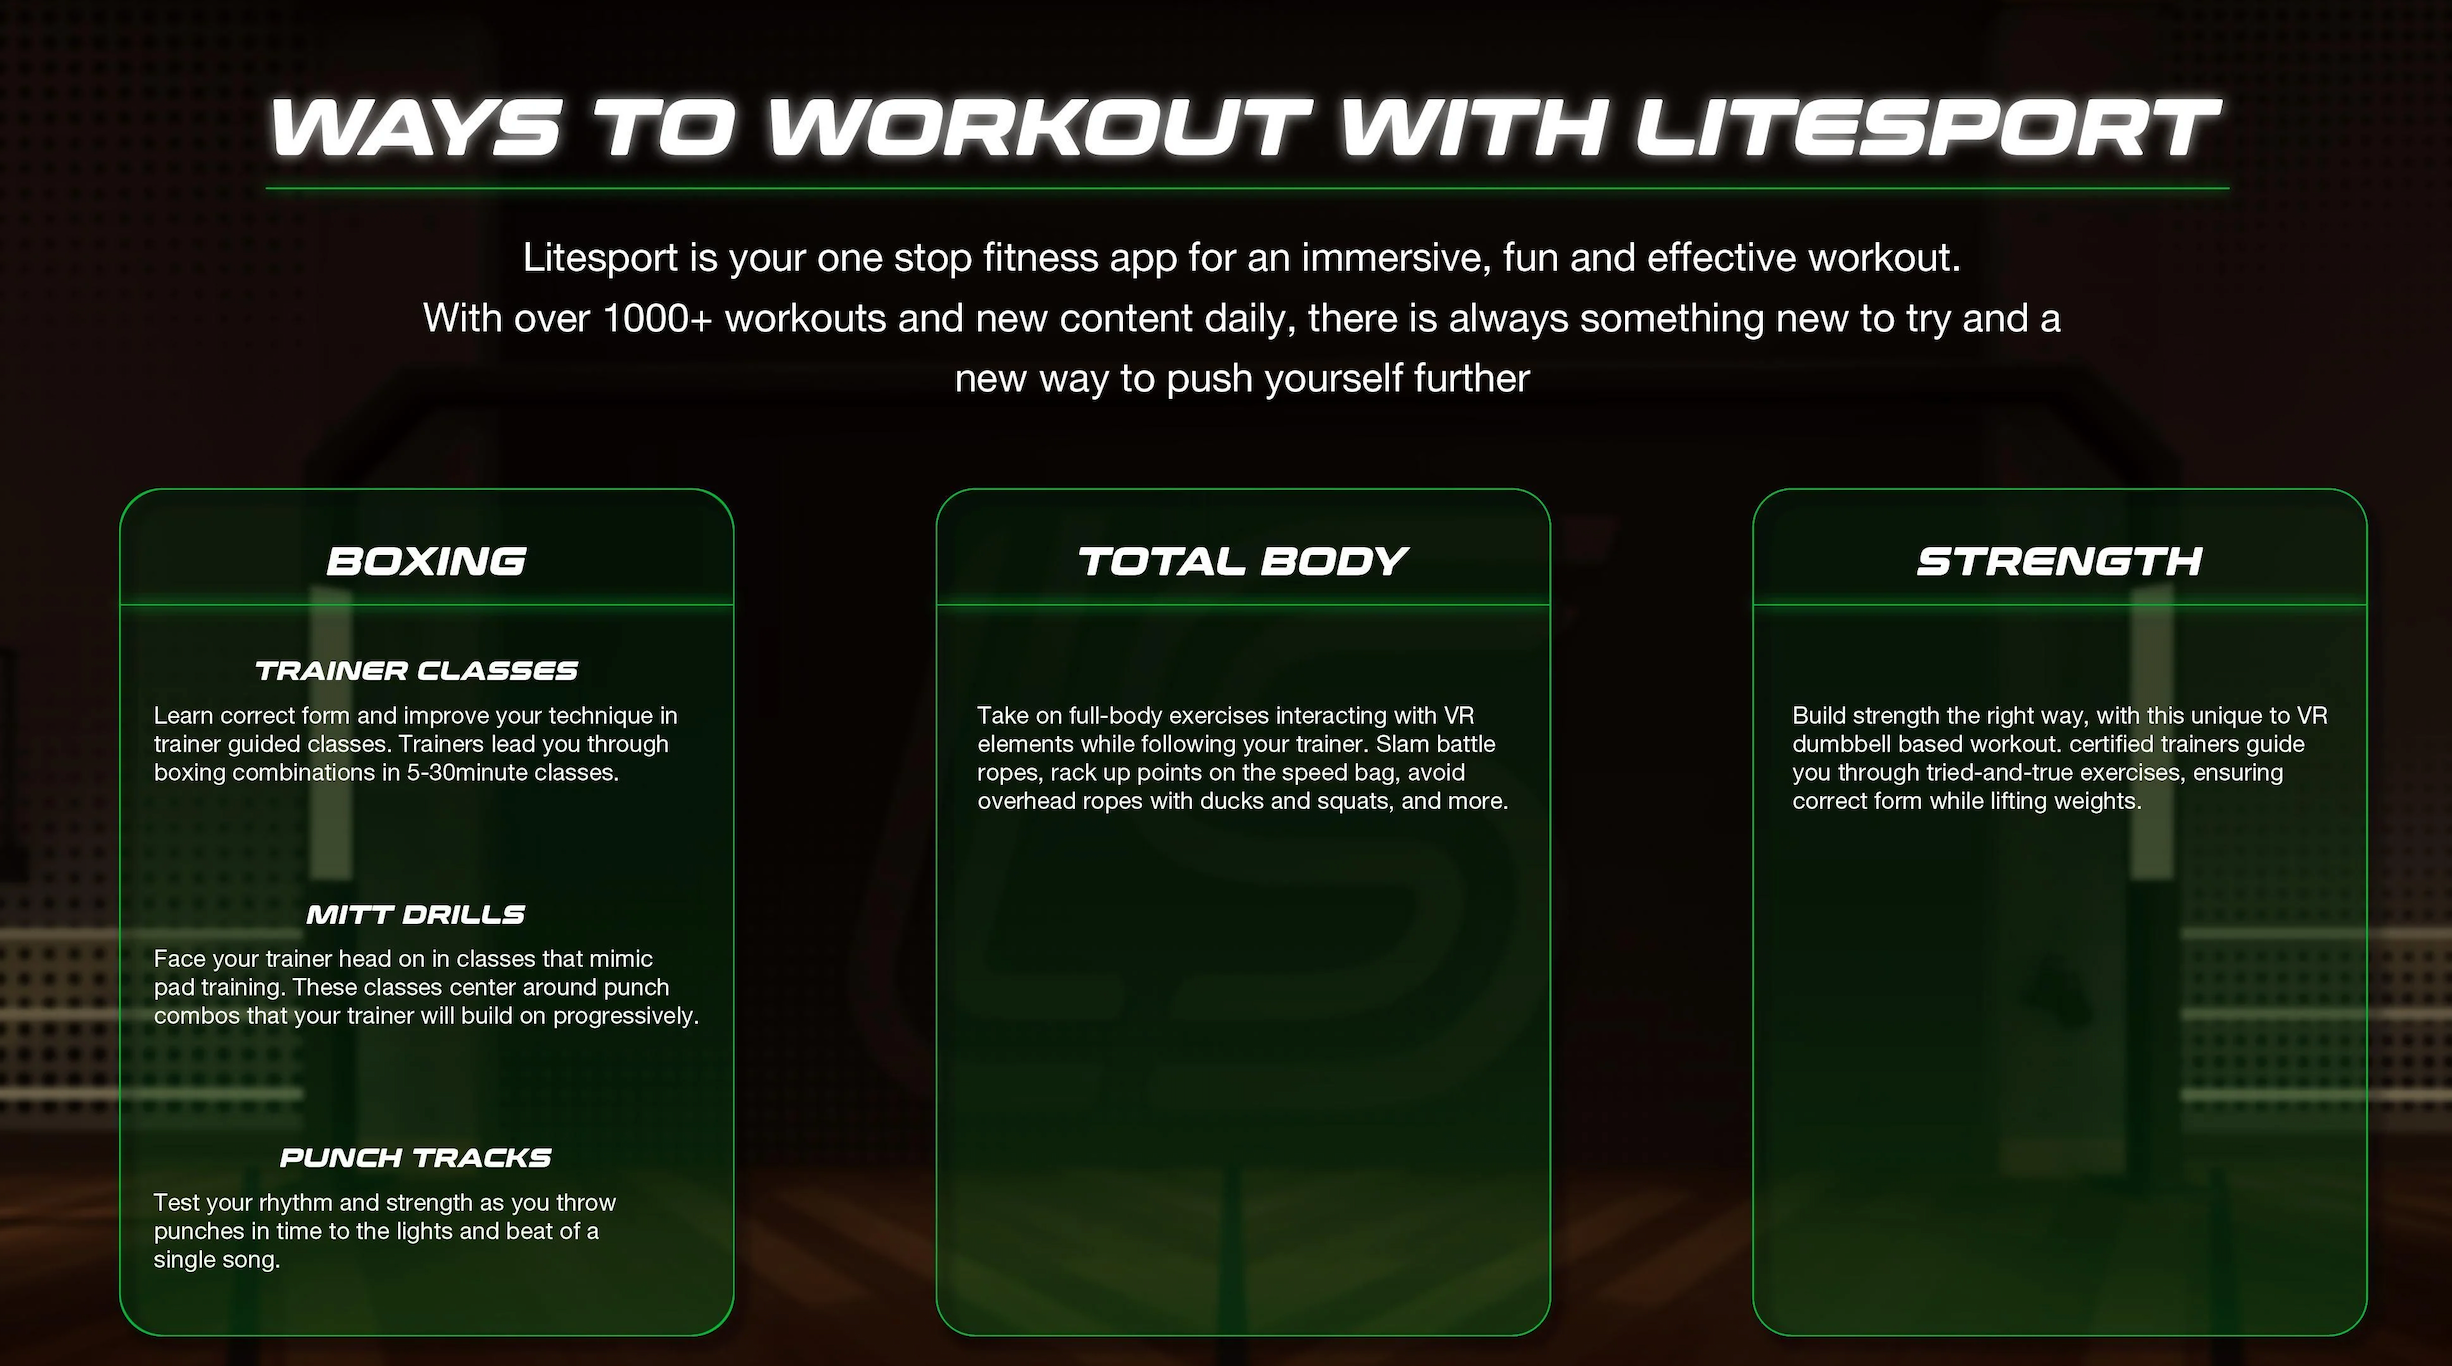 Ways to workout with Litesport